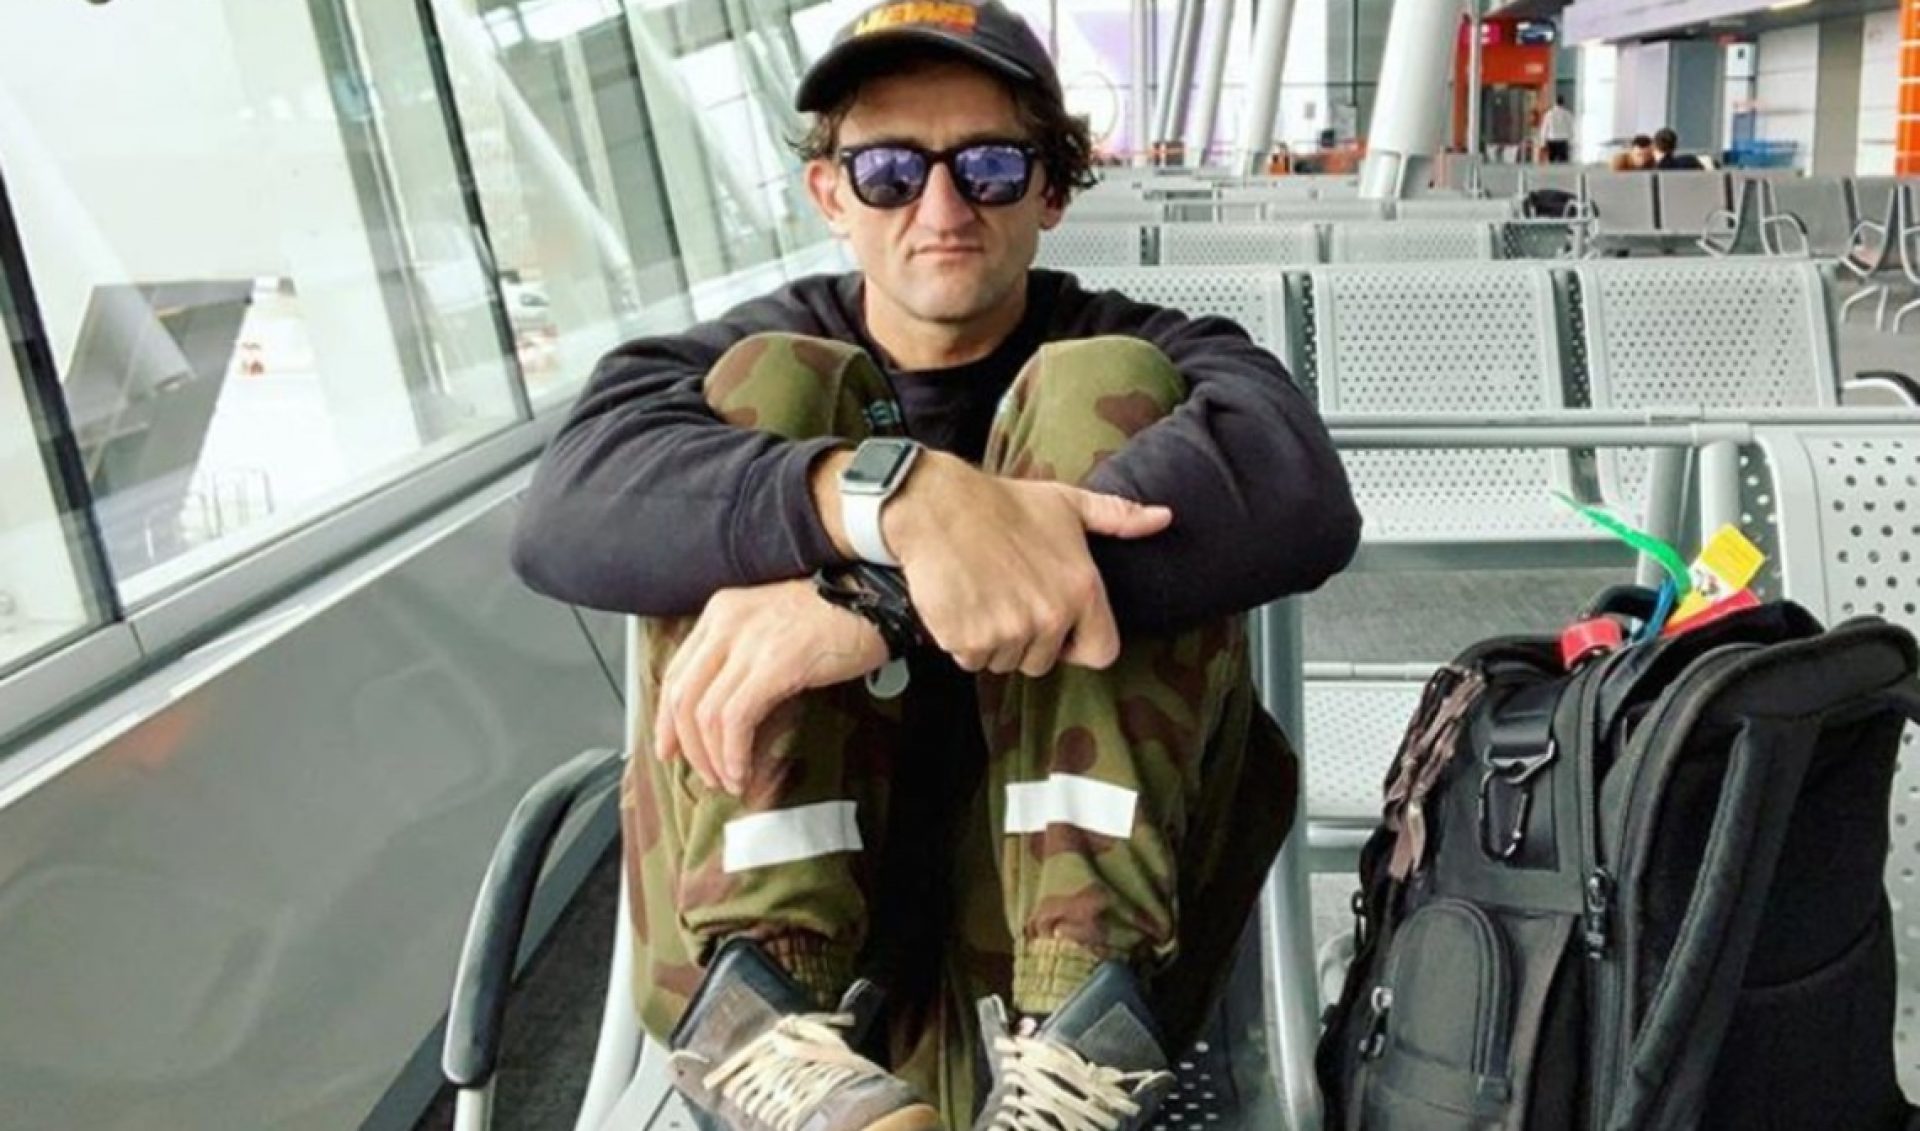 Casey Neistat Invests In $4.5 Million Seed Round For Aperitif Startup ‘Haus’